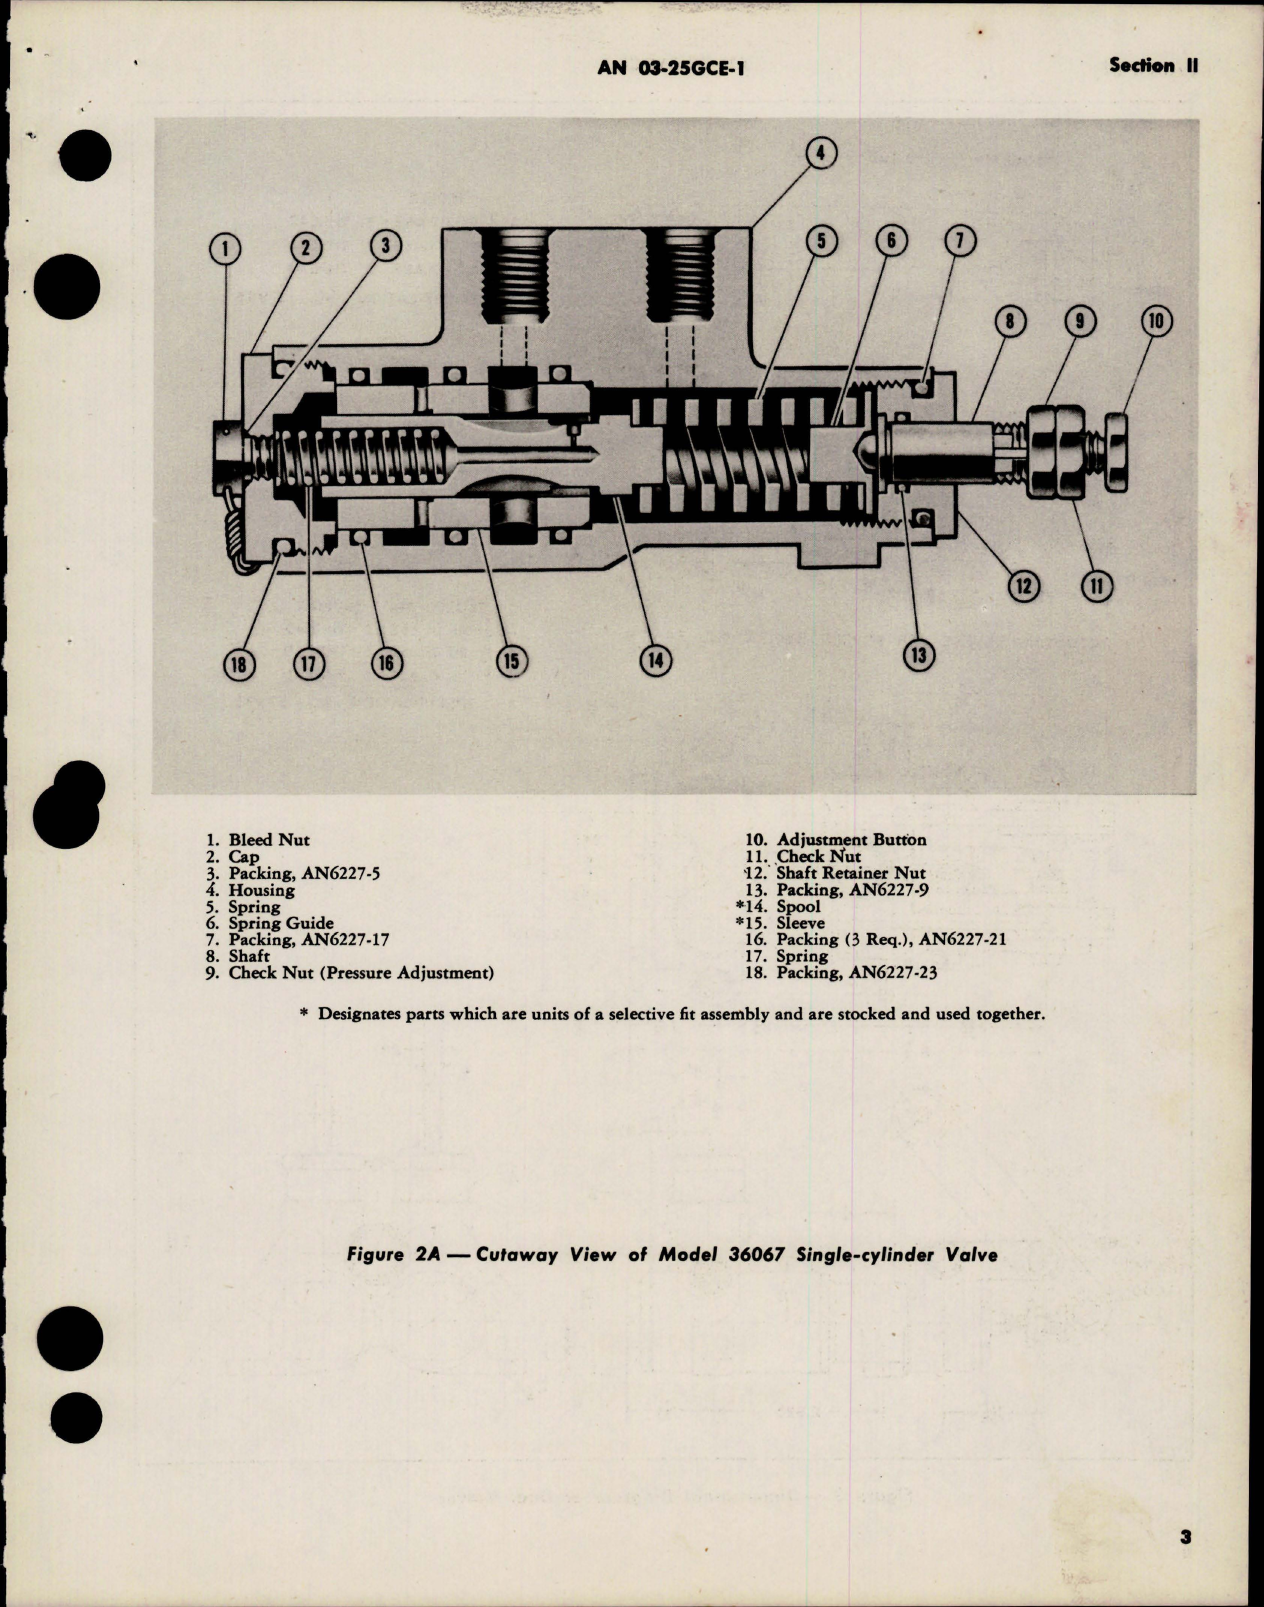 Sample page 9 from AirCorps Library document: Operation, Service, Overhaul Instructions with Parts Catalog for Brake Control Valves